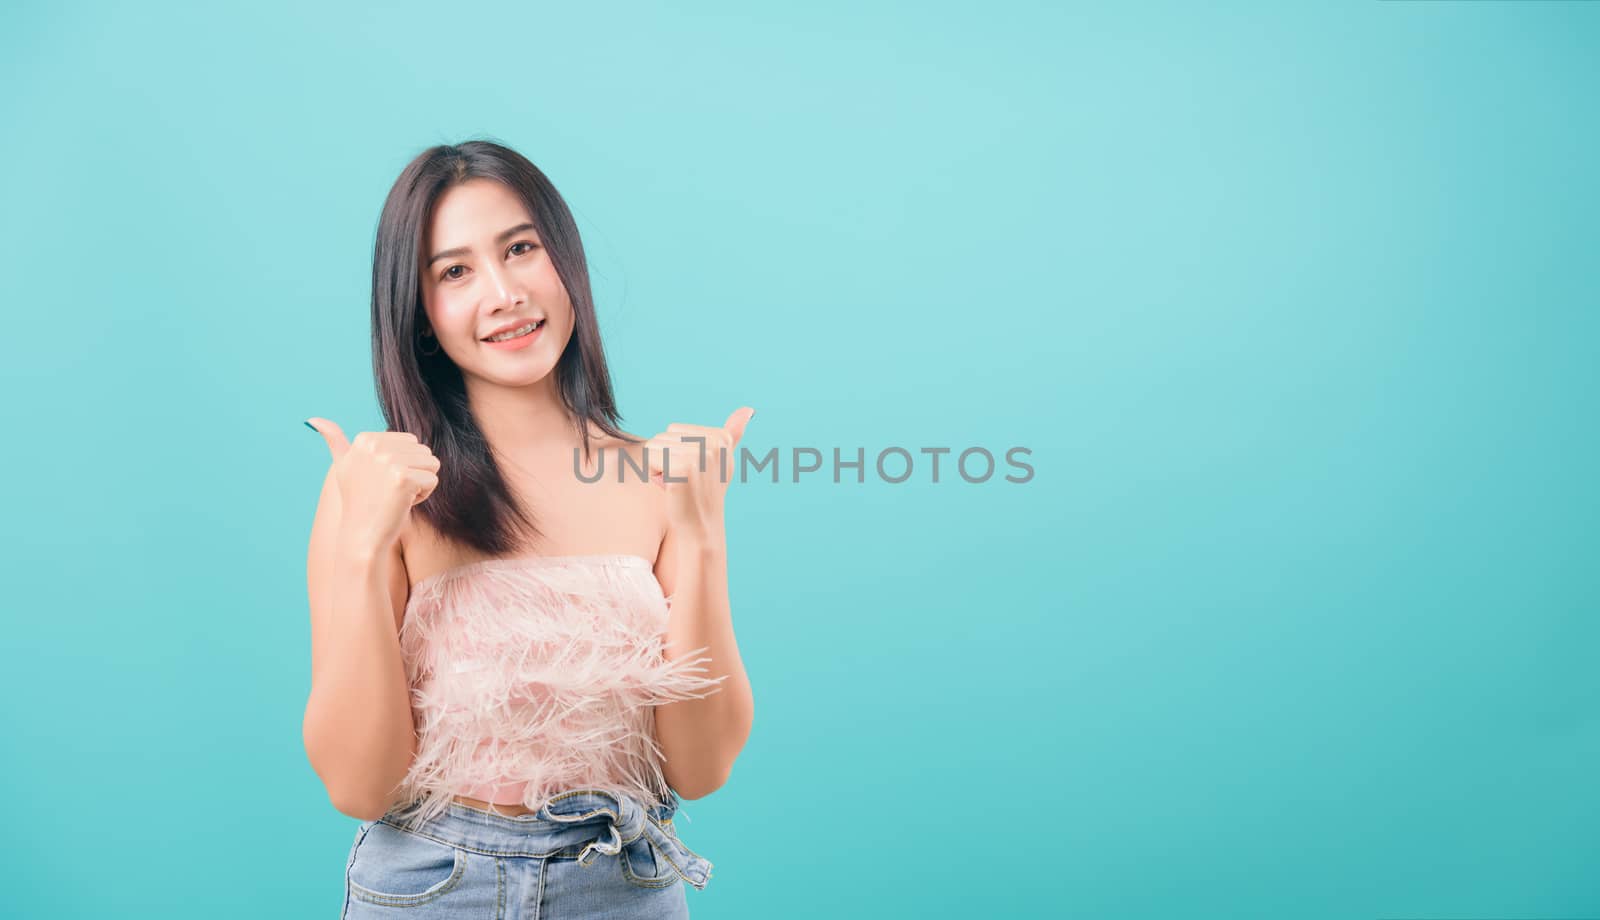 Asian happy portrait beautiful young woman standing smiling showing hand showing thumbs-up sign and looking to camera isolated on blue background with copy space for text